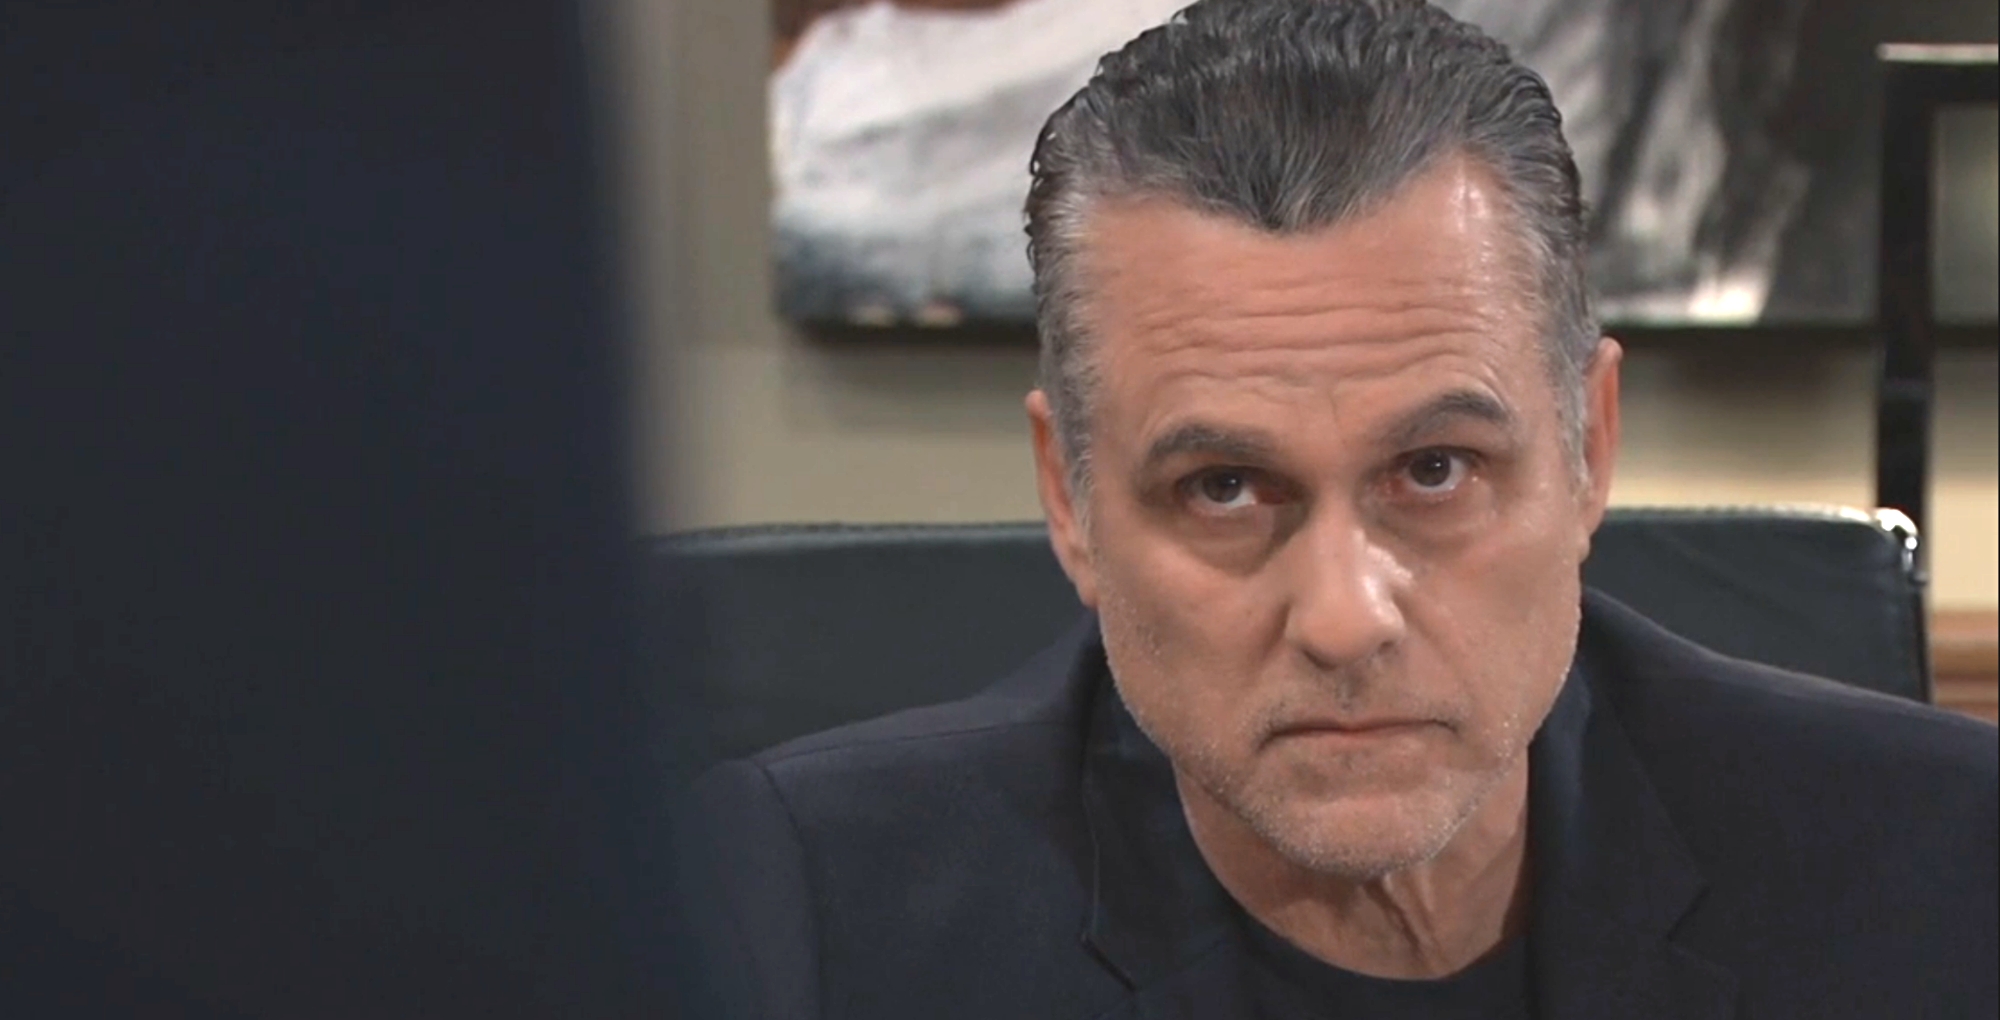 General Hospital Spoilers: Will Michael Tell Sonny The Whole Truth?